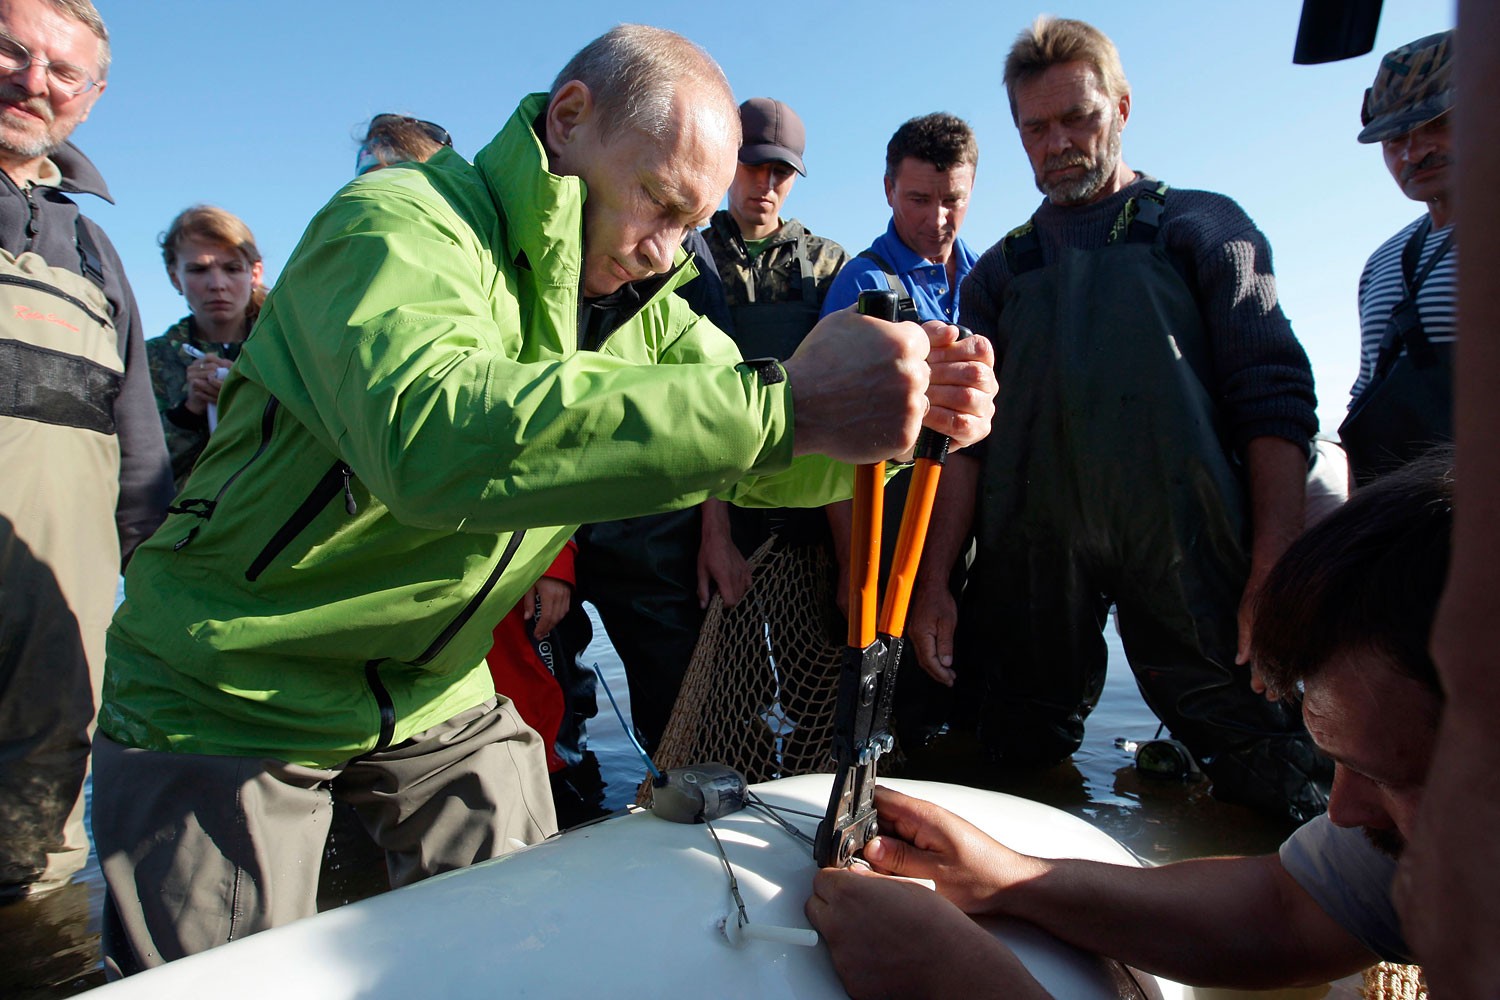 Russia's Prime Minister Putin attaches a satellite tracking tag to a Beluga whale named Dasha as he visits Chkalov island